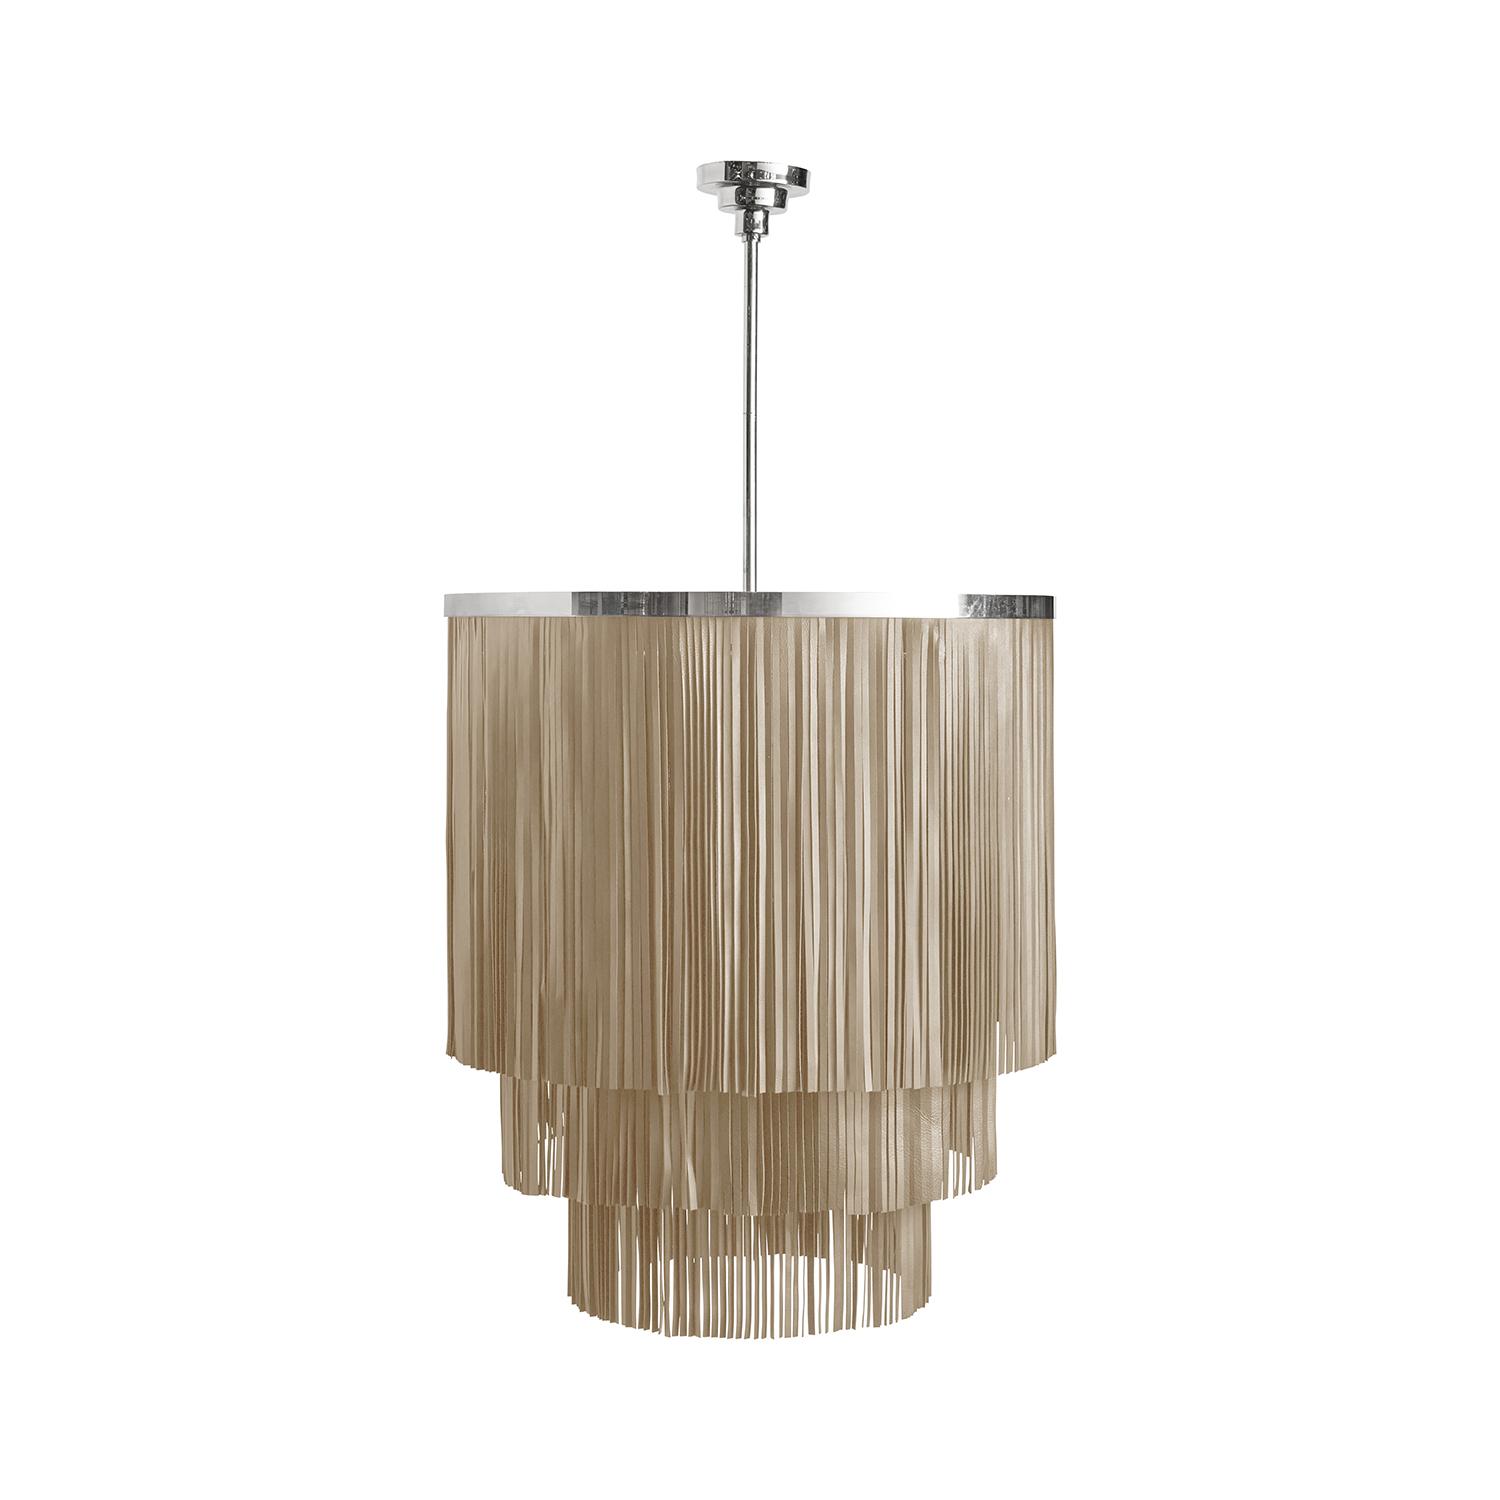 Small NeKeia Leather Chandelier in Nickel Finish and Cream-Stone Leather